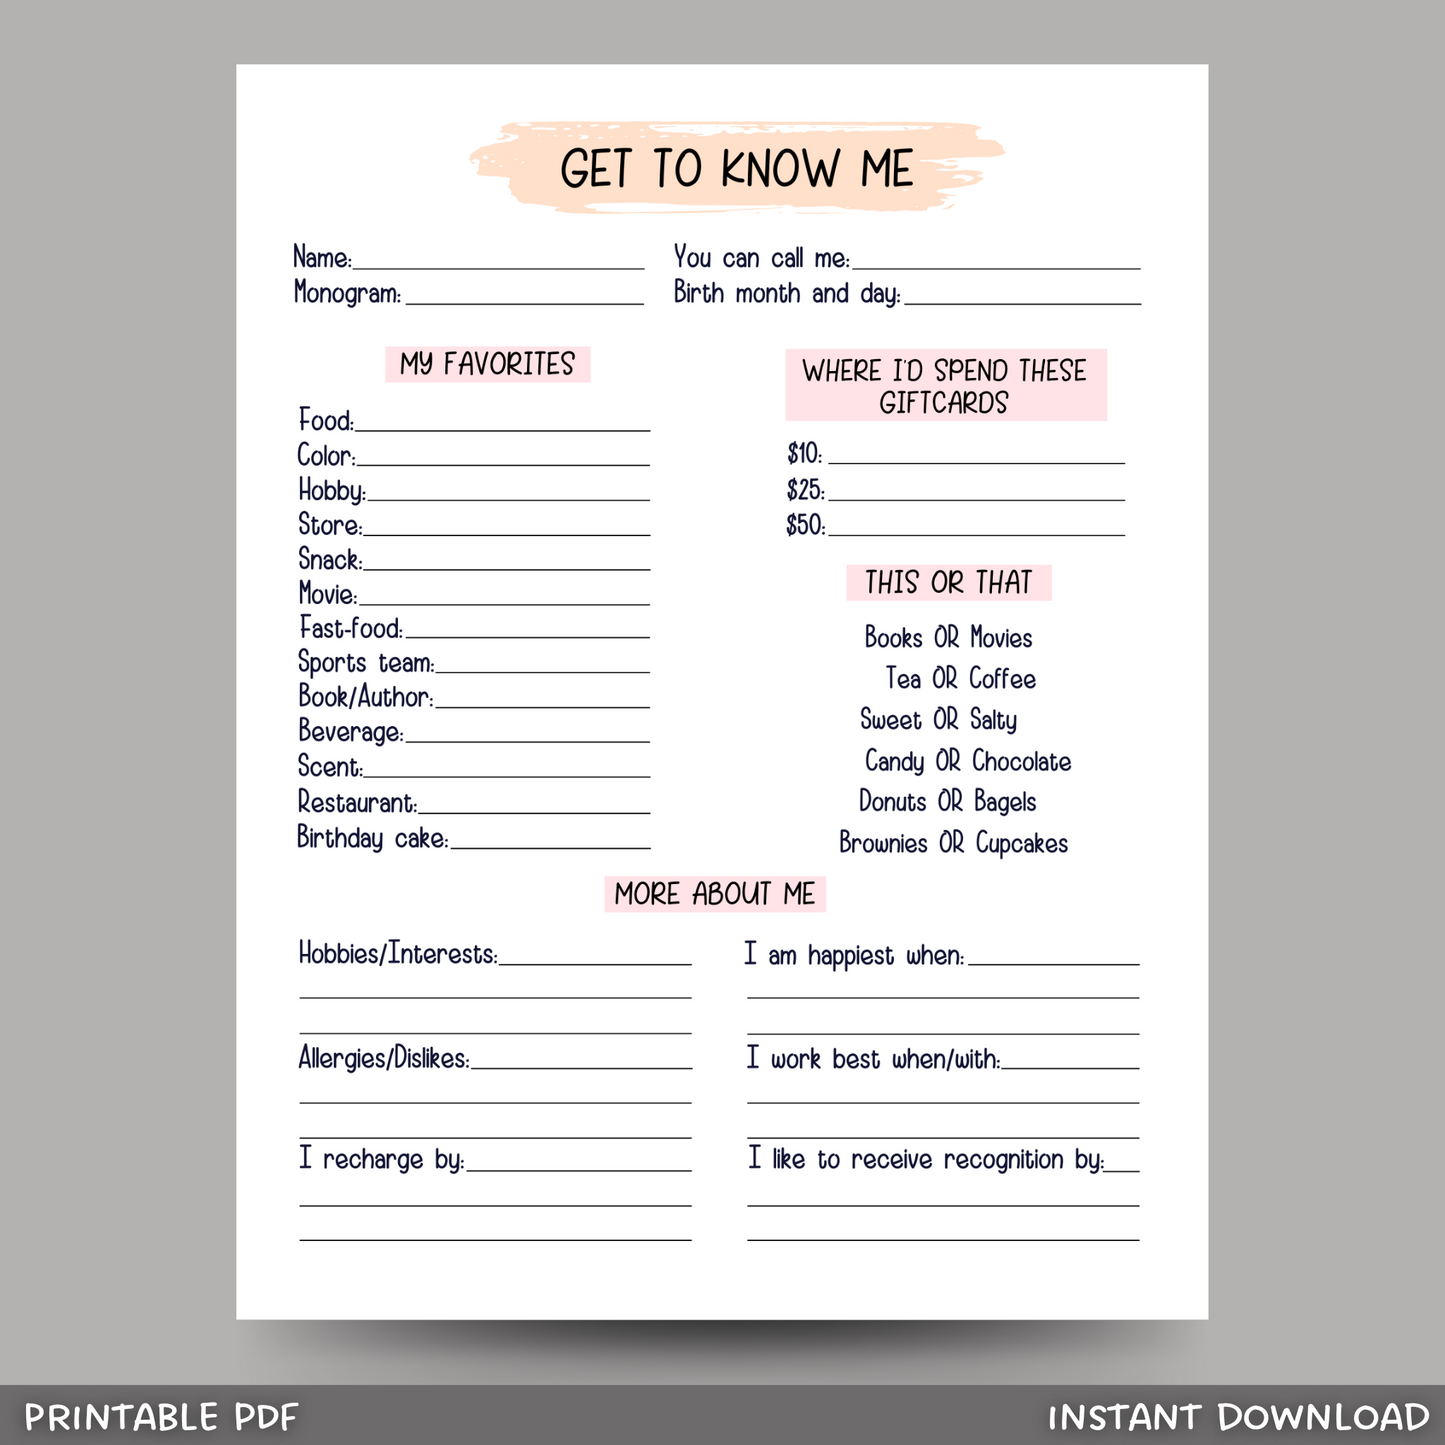 Coworker Questions Printable, All About Me Employee Survey